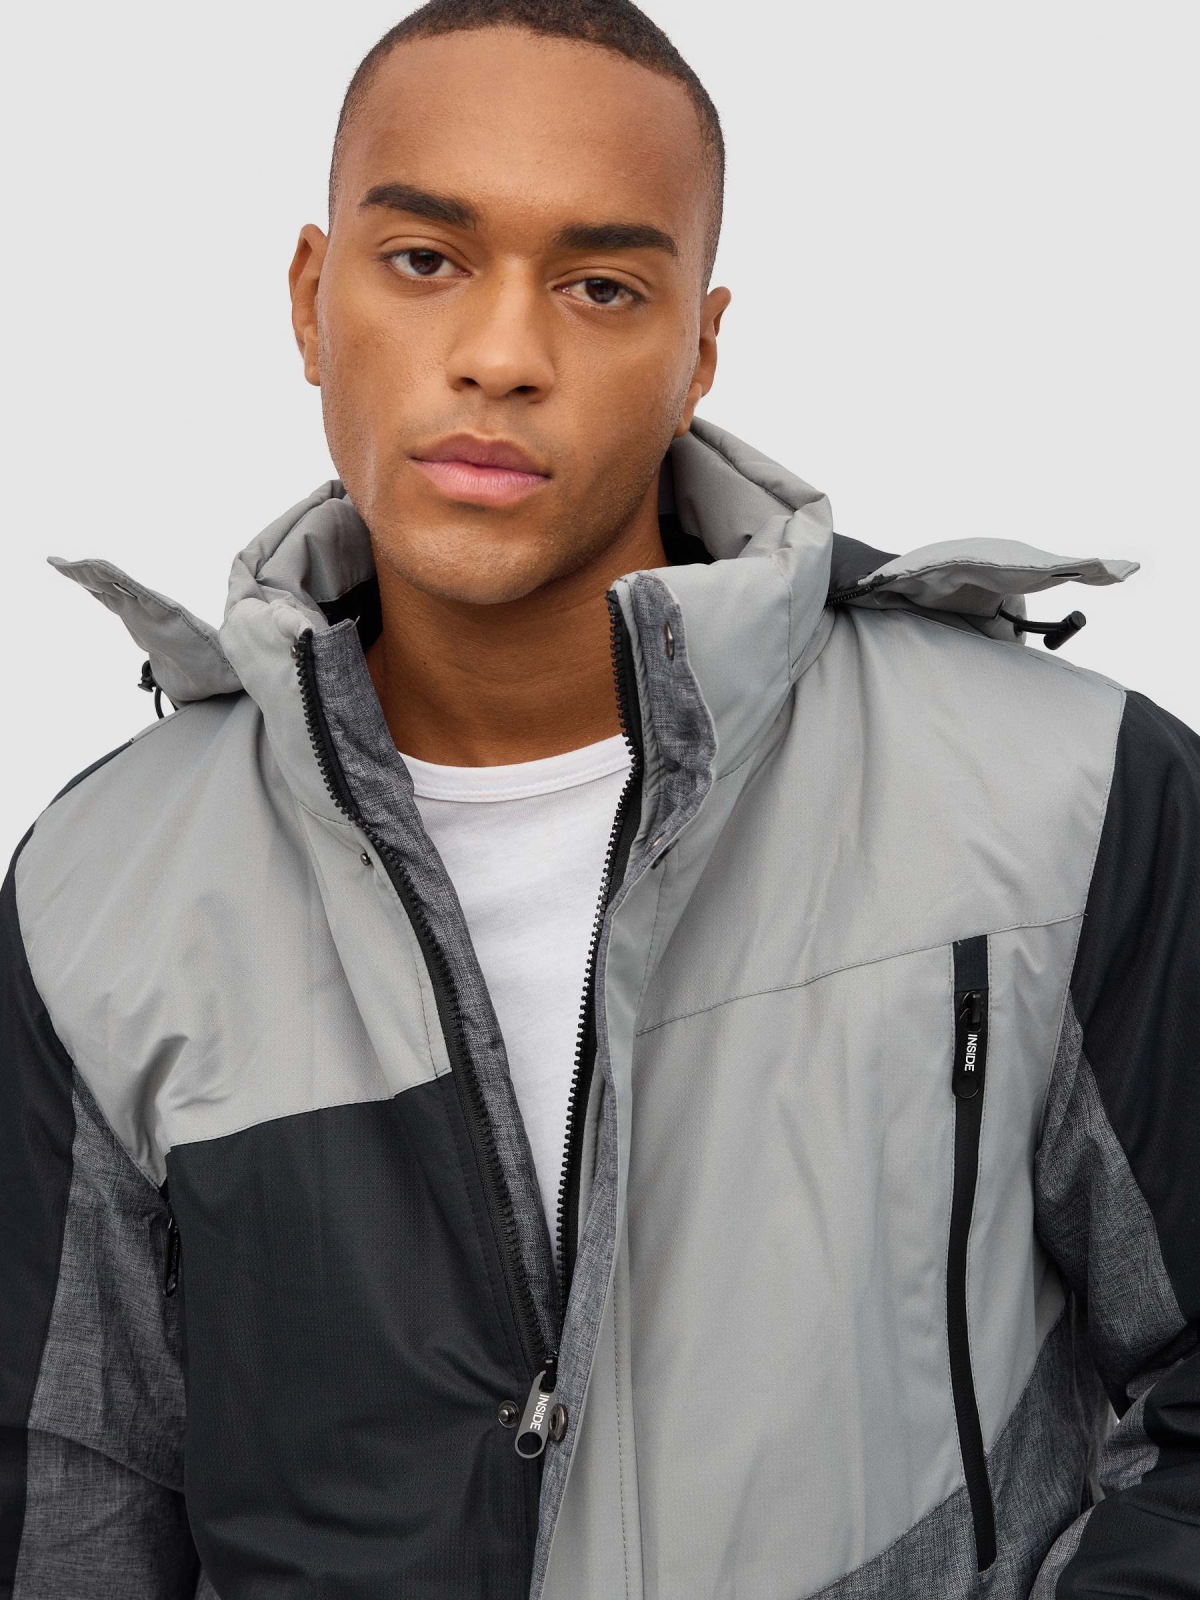 Nylon jacket with closed pockets grey detail view